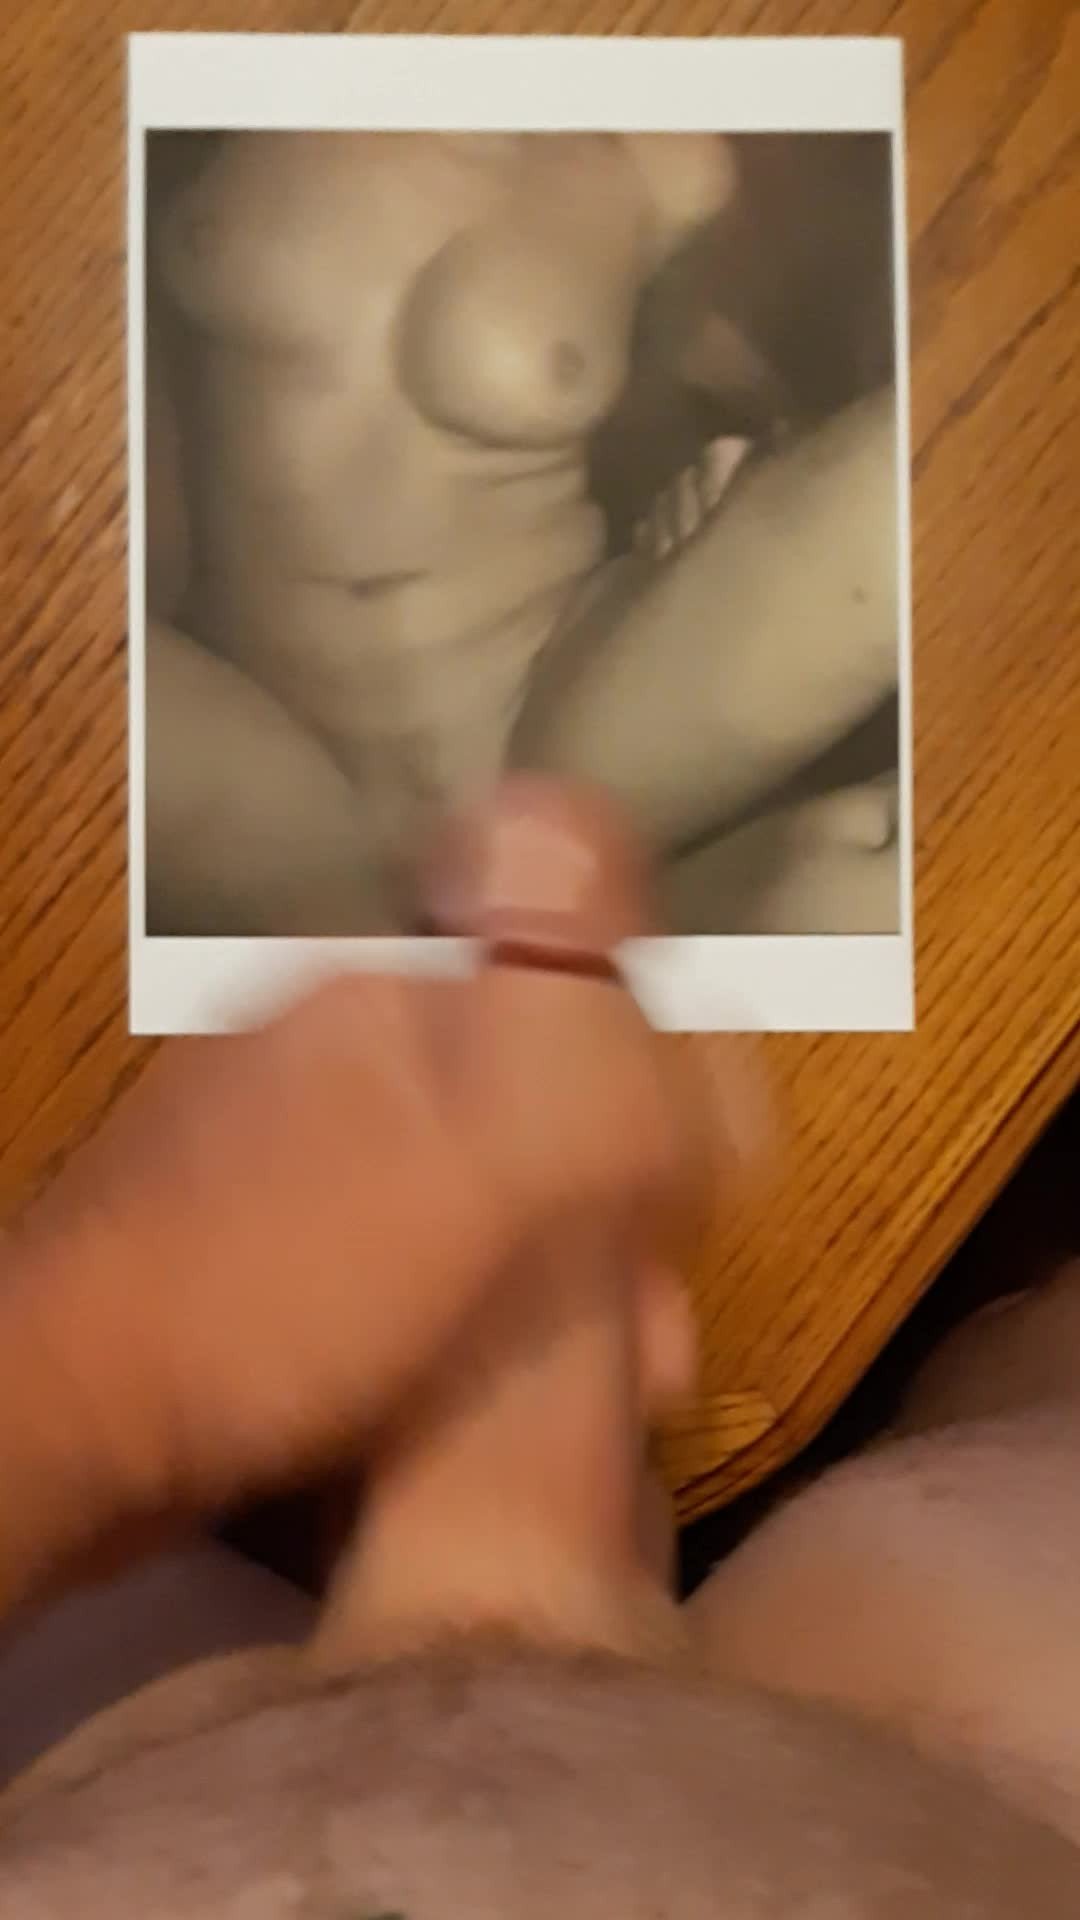 Video by RooferMD with the username @RooferMD, who is a verified user,  August 25, 2021 at 2:17 PM. The post is about the topic Cum tributes and the text says 'Just a little glazing'